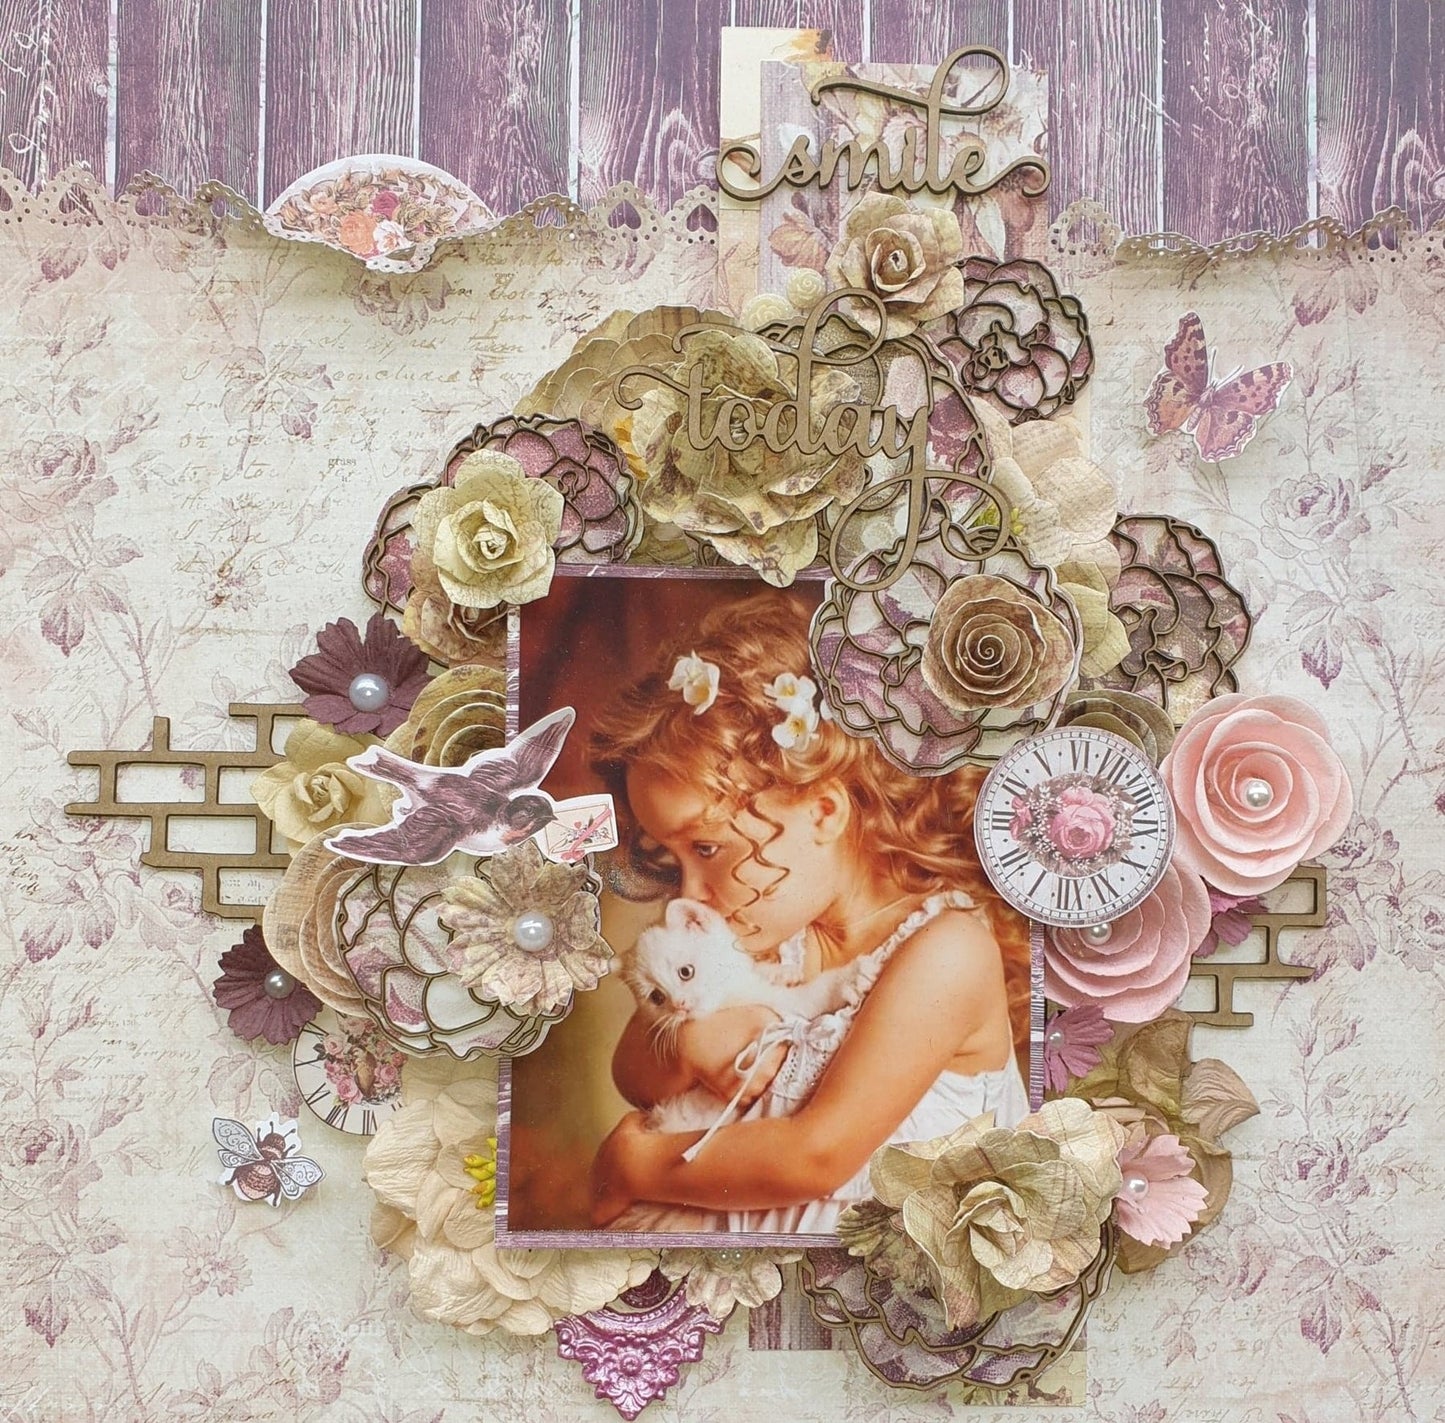 Scrapaholics Blossoms Chipboard for DIY Projects, Scrapbooking, Art Journals, Mixed Media, Collage